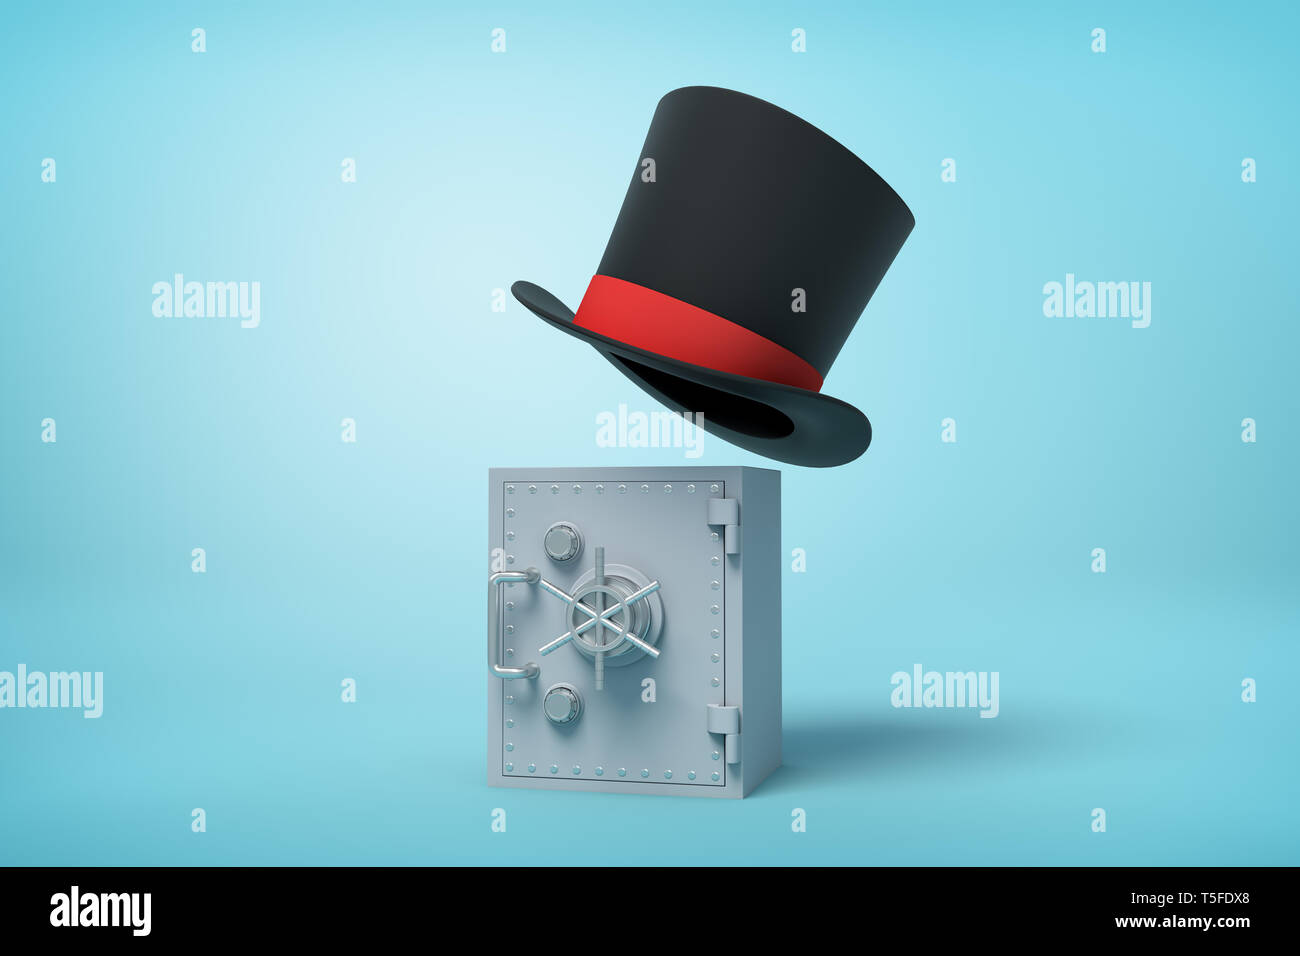 3d rendering of gray metal money vault and black tophat floating in air above it on light-blue background. Stock Photo